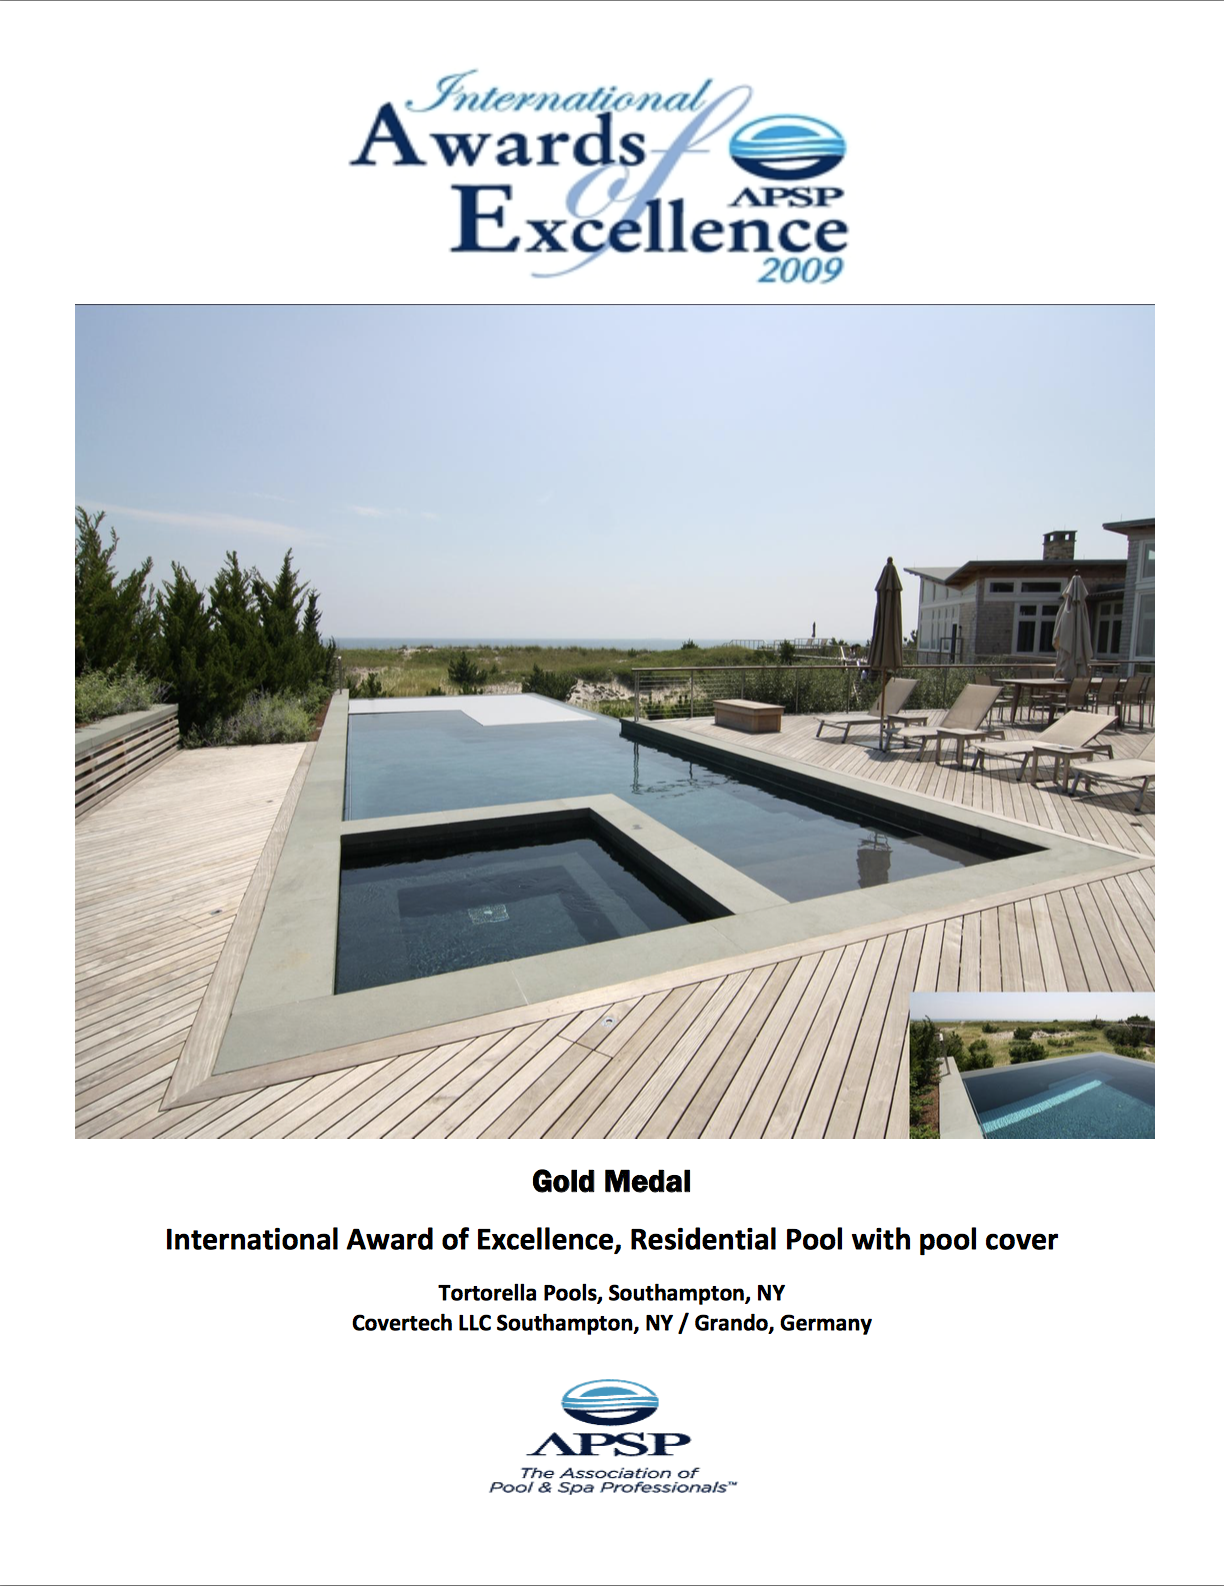 Covertech_GOLD_APSP_International_Award_Res_Pools_with_automatic_pool_cover